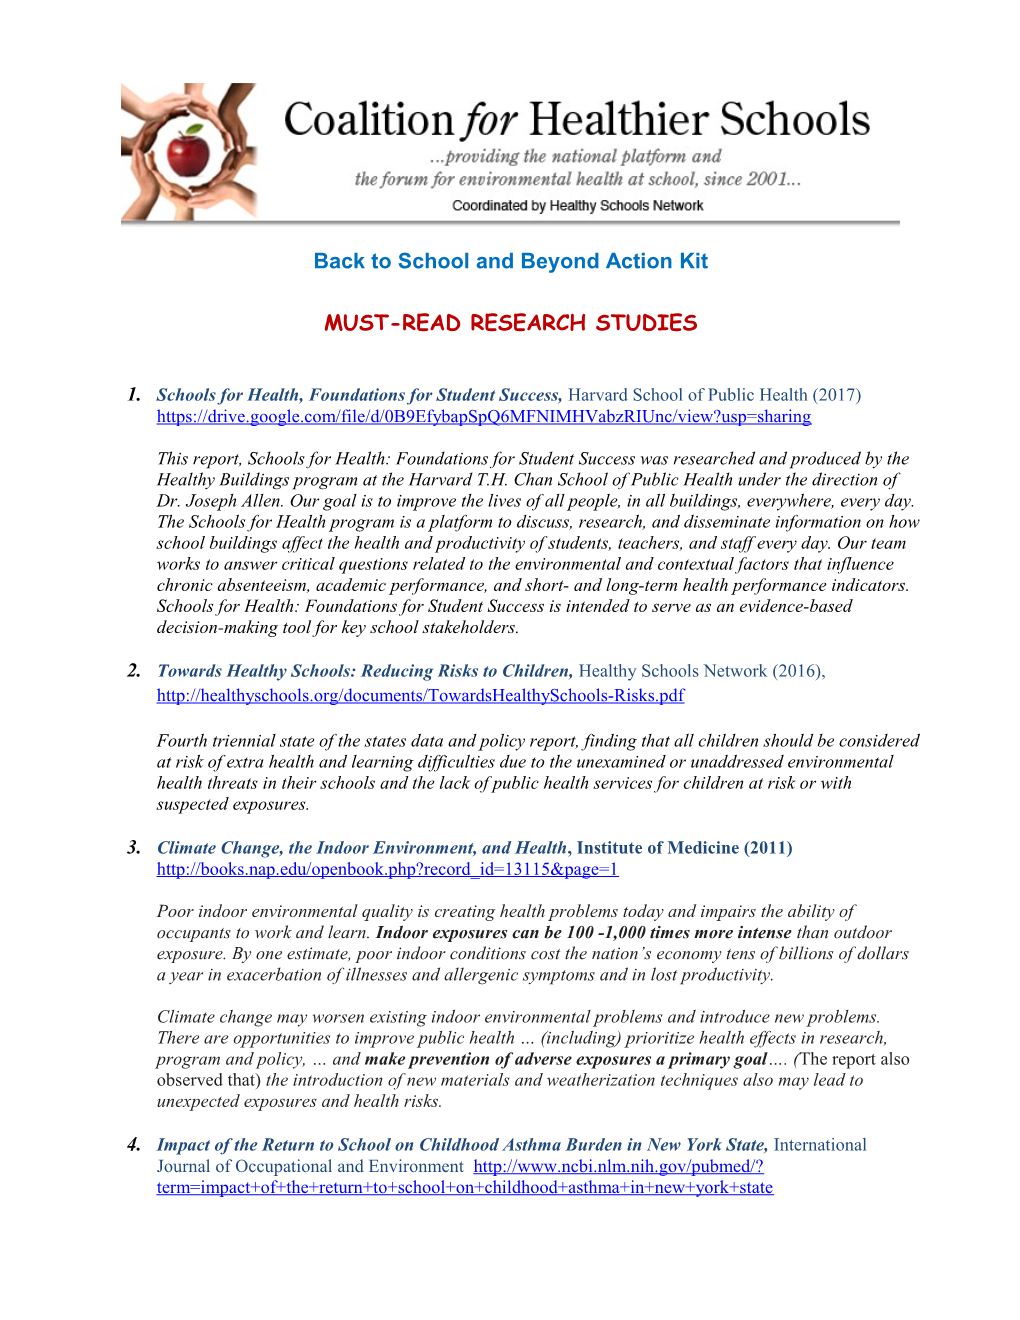 Back to School and Beyond Action Kit MUST-READ RESEARCH STUDIES